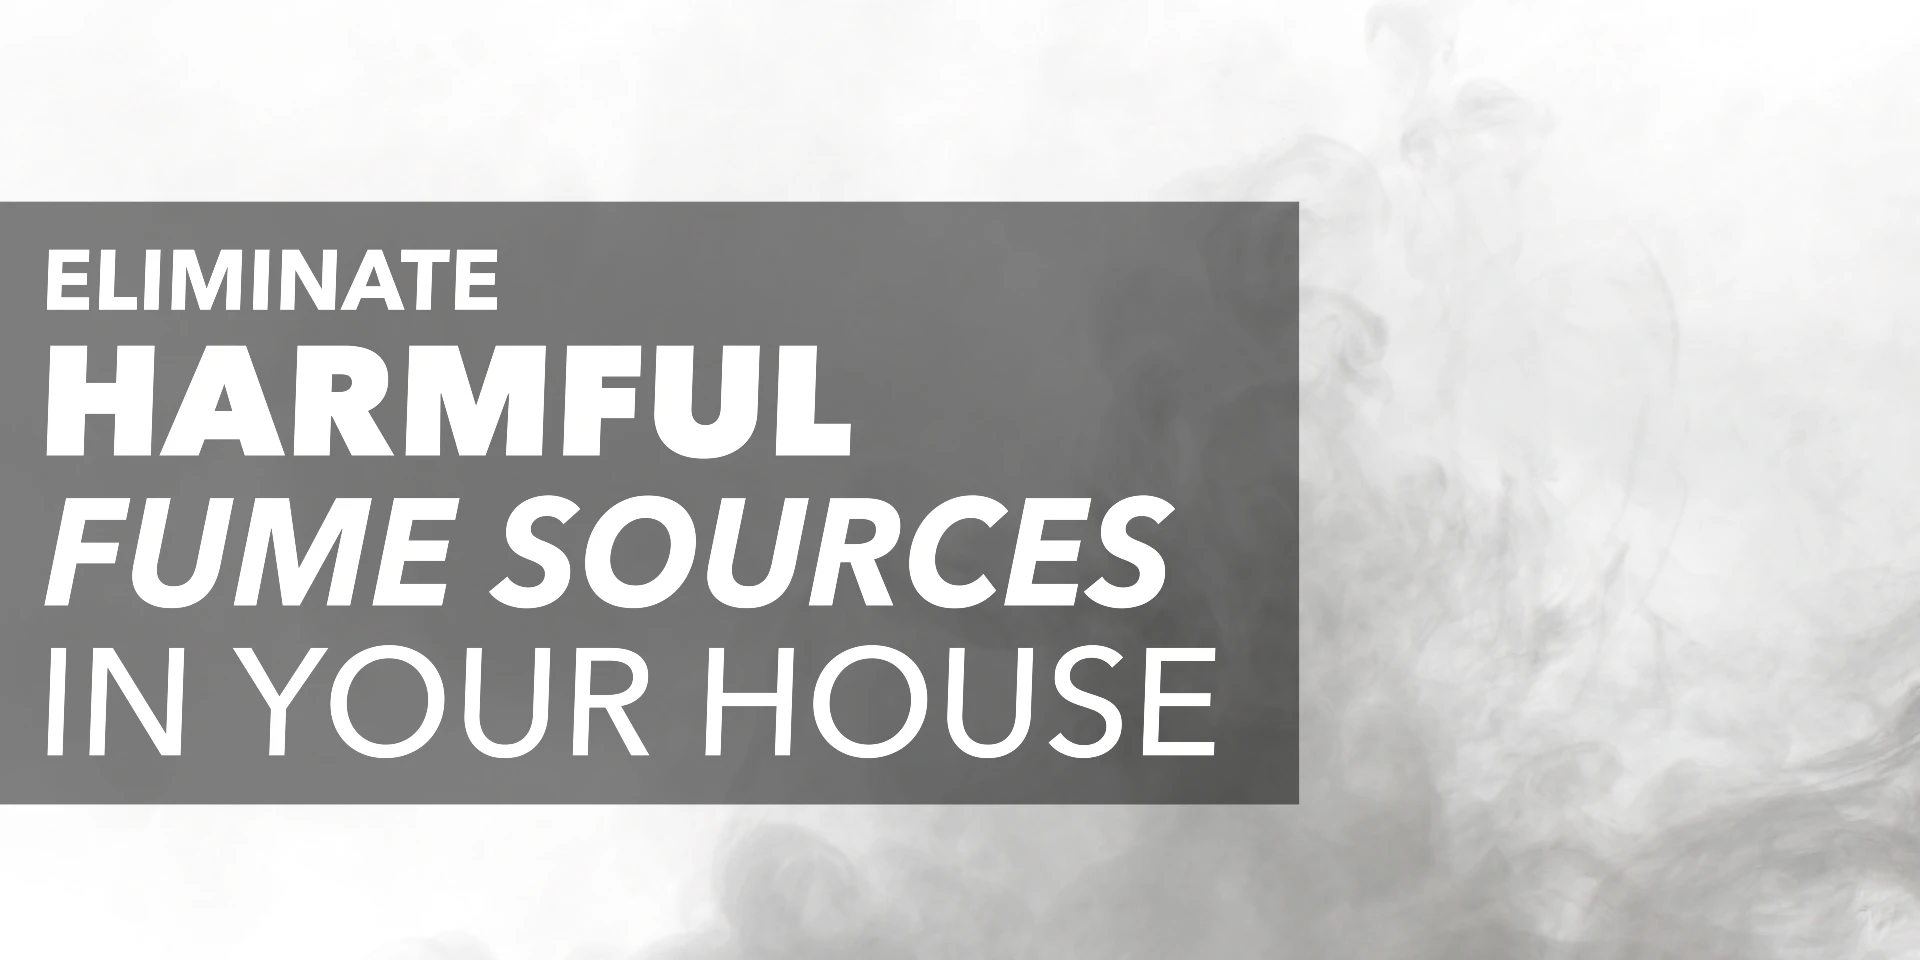 Fumes with text: "Eliminate harmful fume sources in your house"